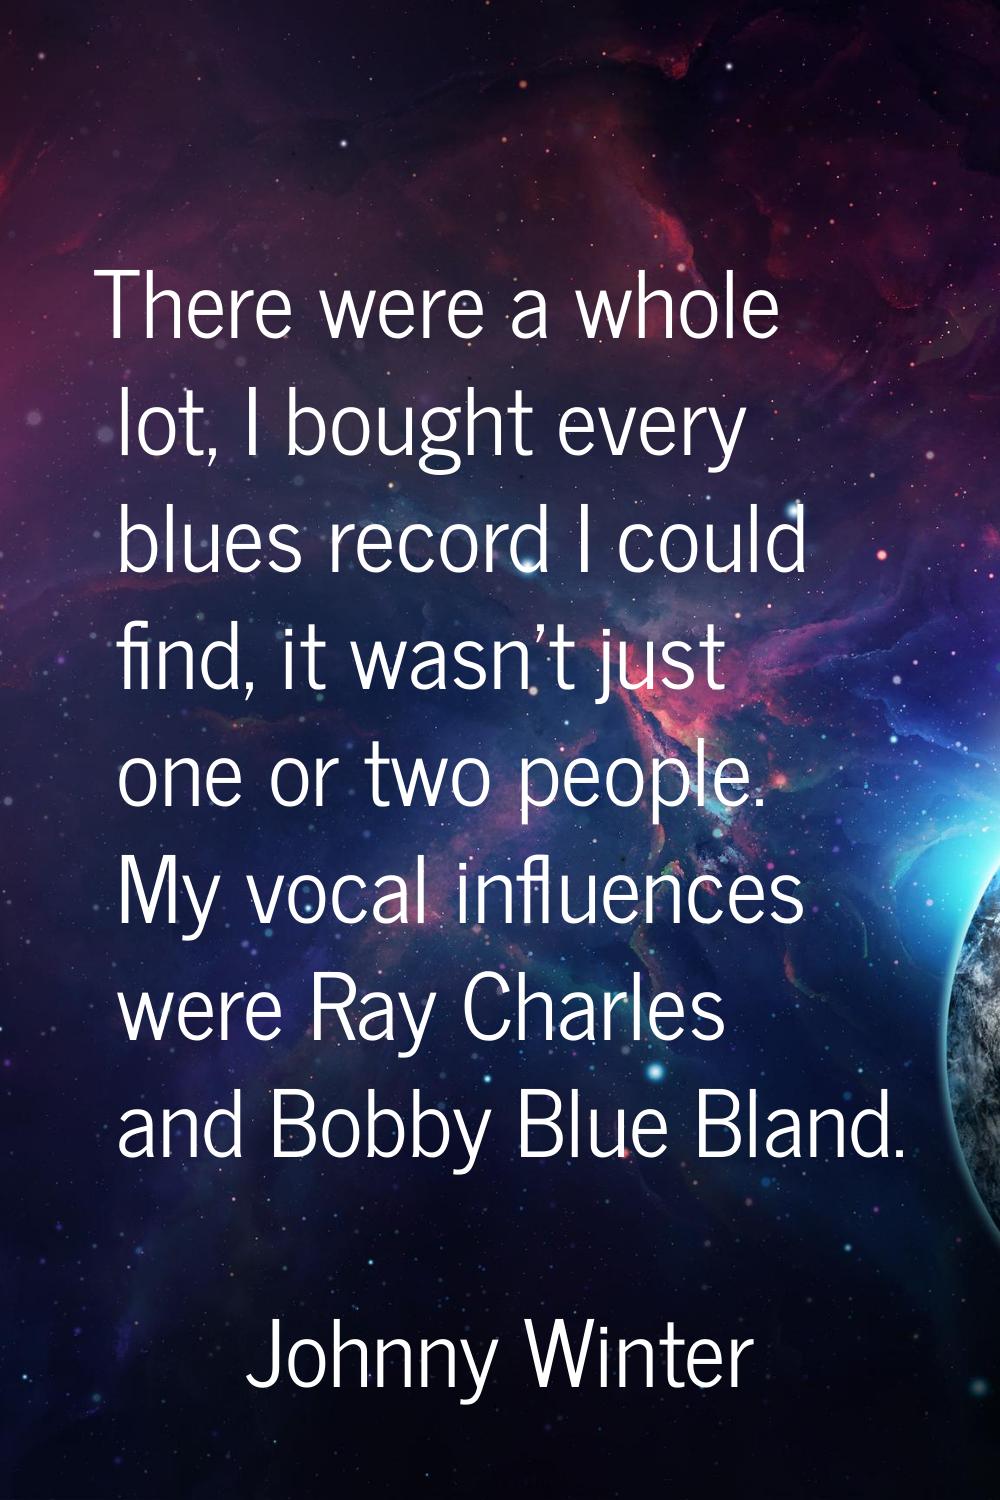 There were a whole lot, I bought every blues record I could find, it wasn't just one or two people.